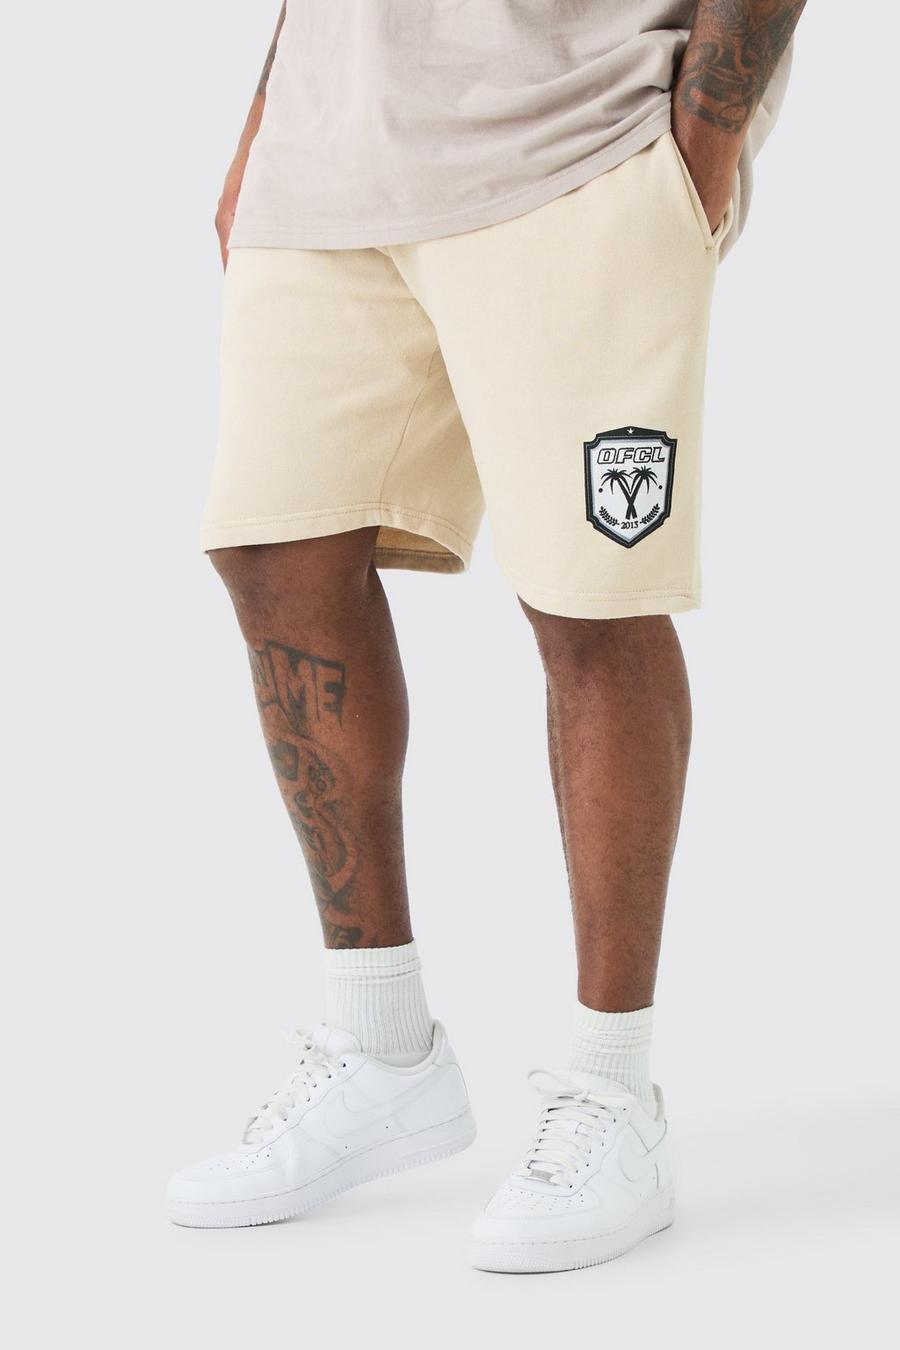 Plus lockere Team Official Shorts in Sand